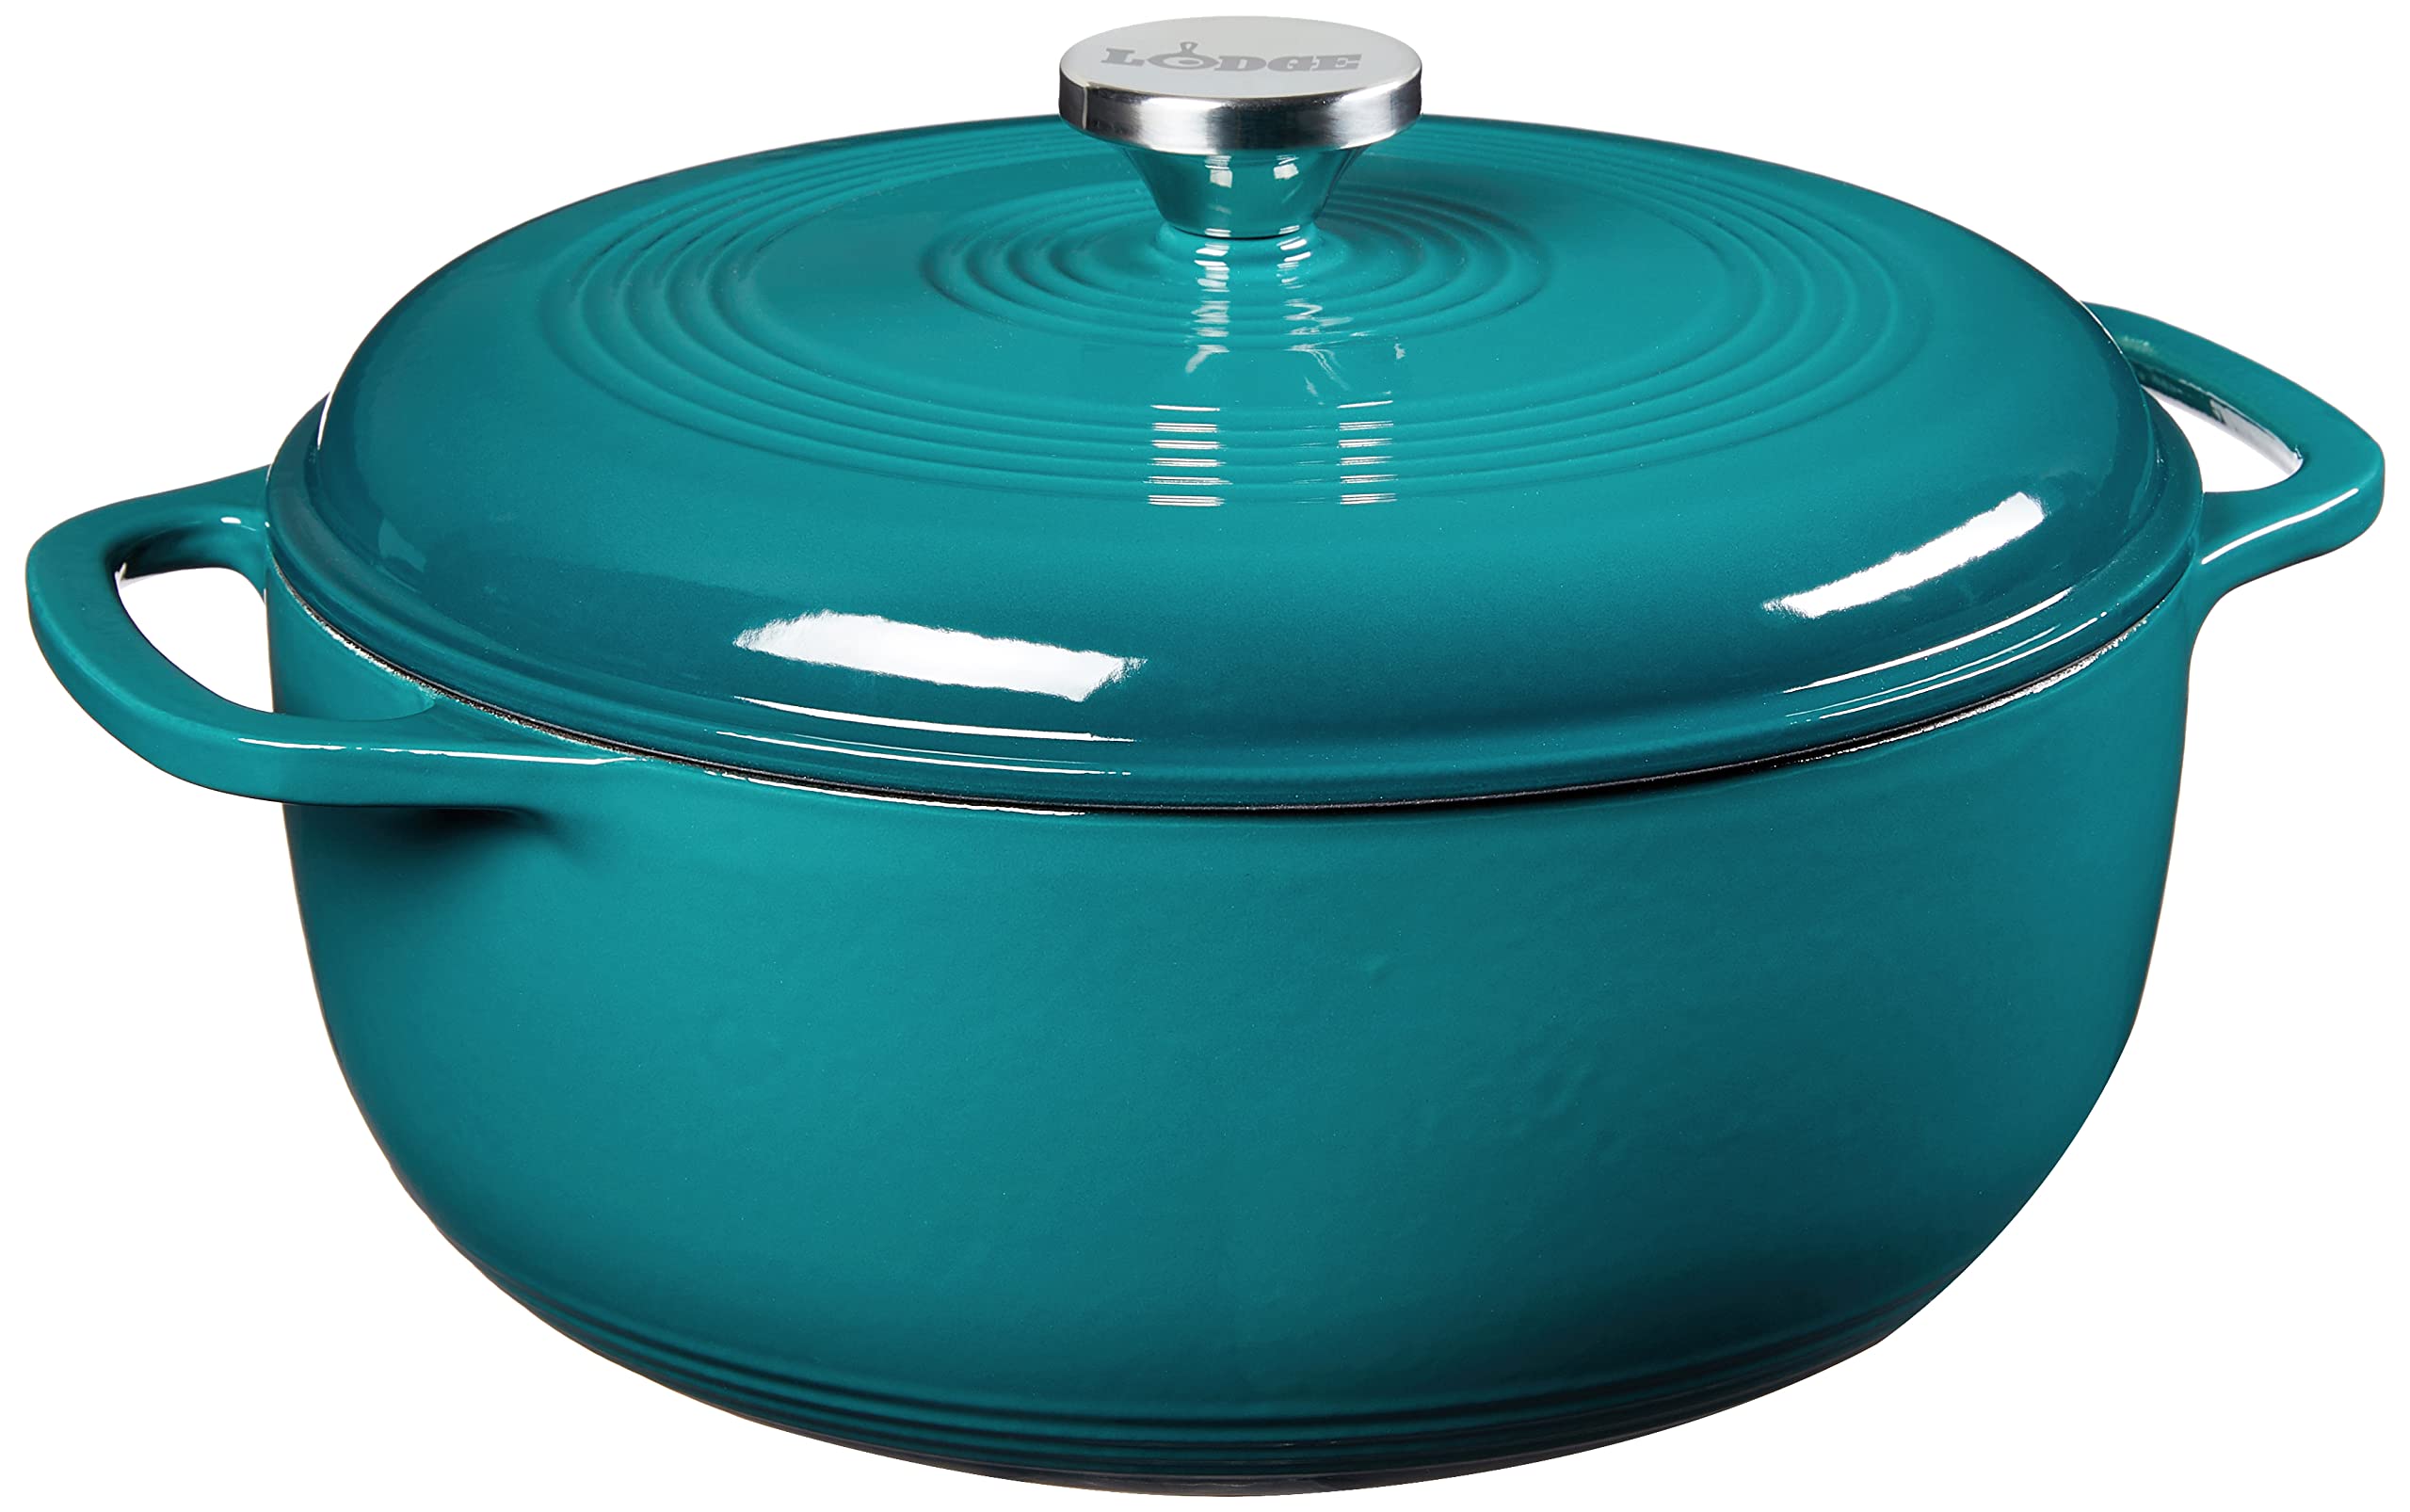 Lodge 6 Quart Enameled Cast Iron Dutch Oven with Lid - Dual Handles - Oven  Safe up to 500° F or on Stovetop - Use to Marinate, C